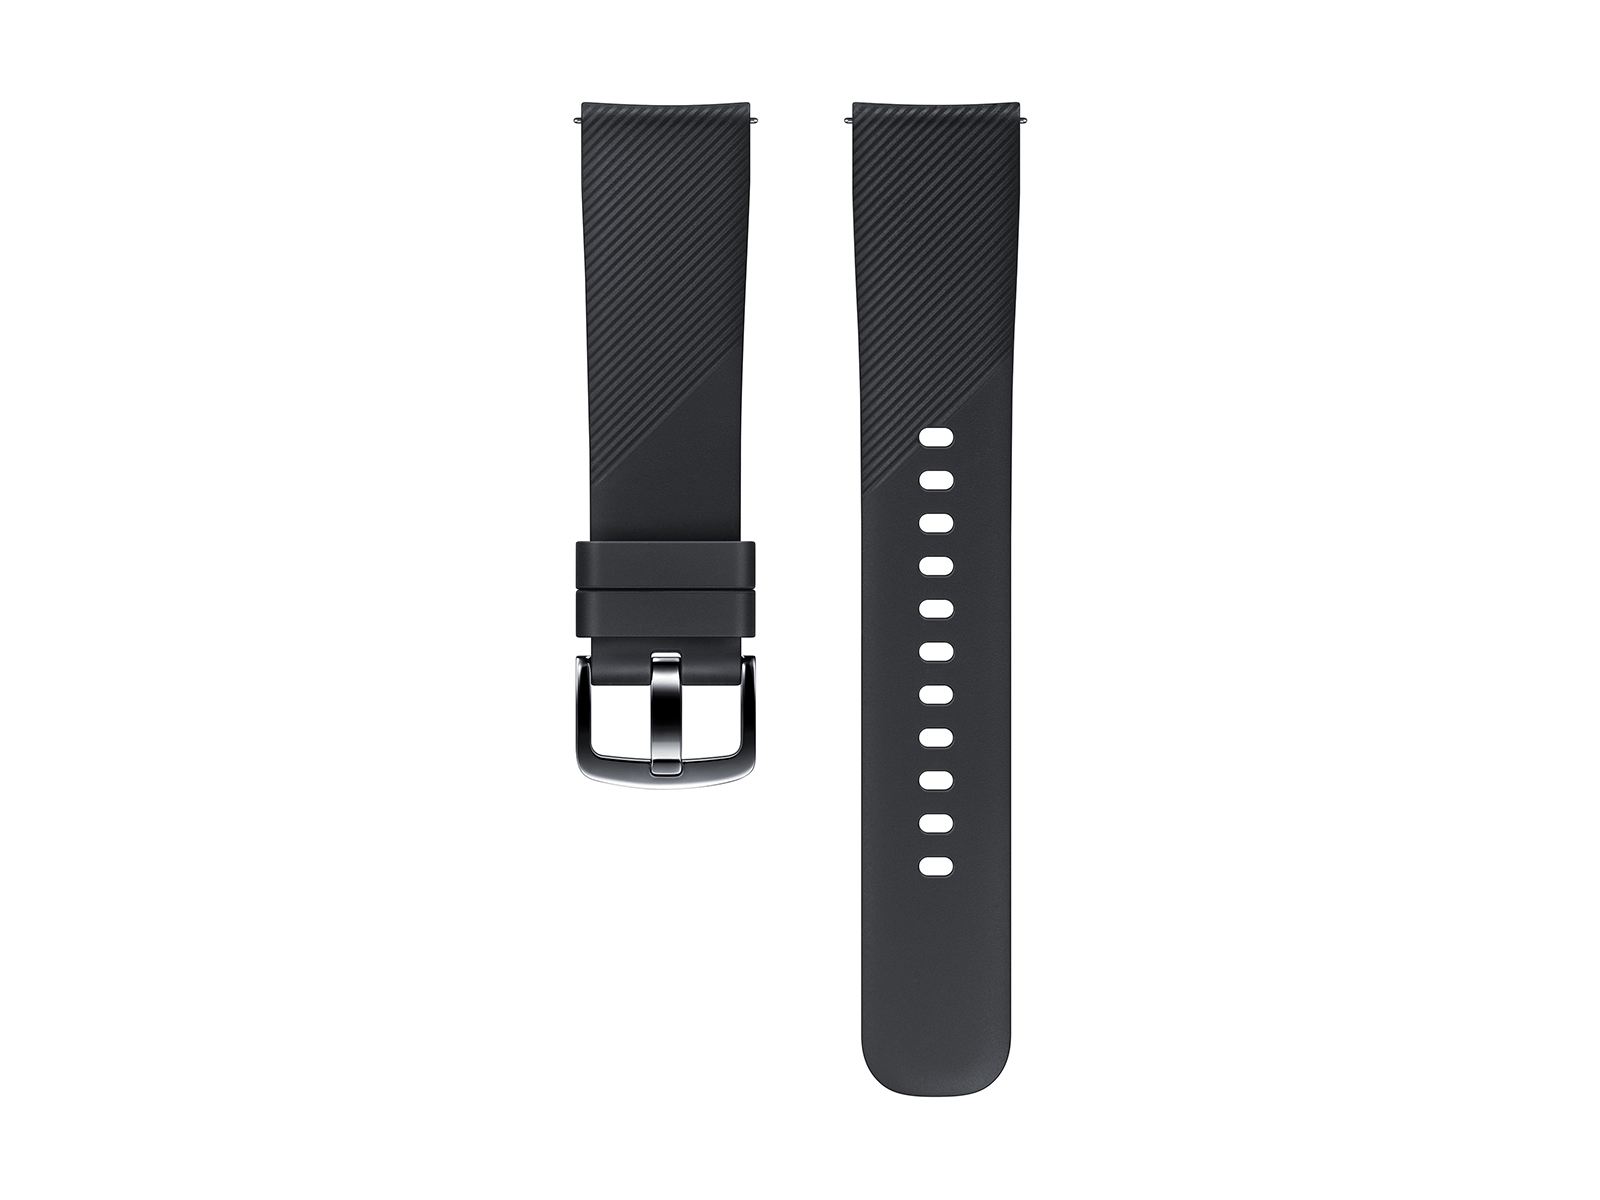 20mm 22mm Silicone Magnetic Strap For Samsung Galaxy Watch Band